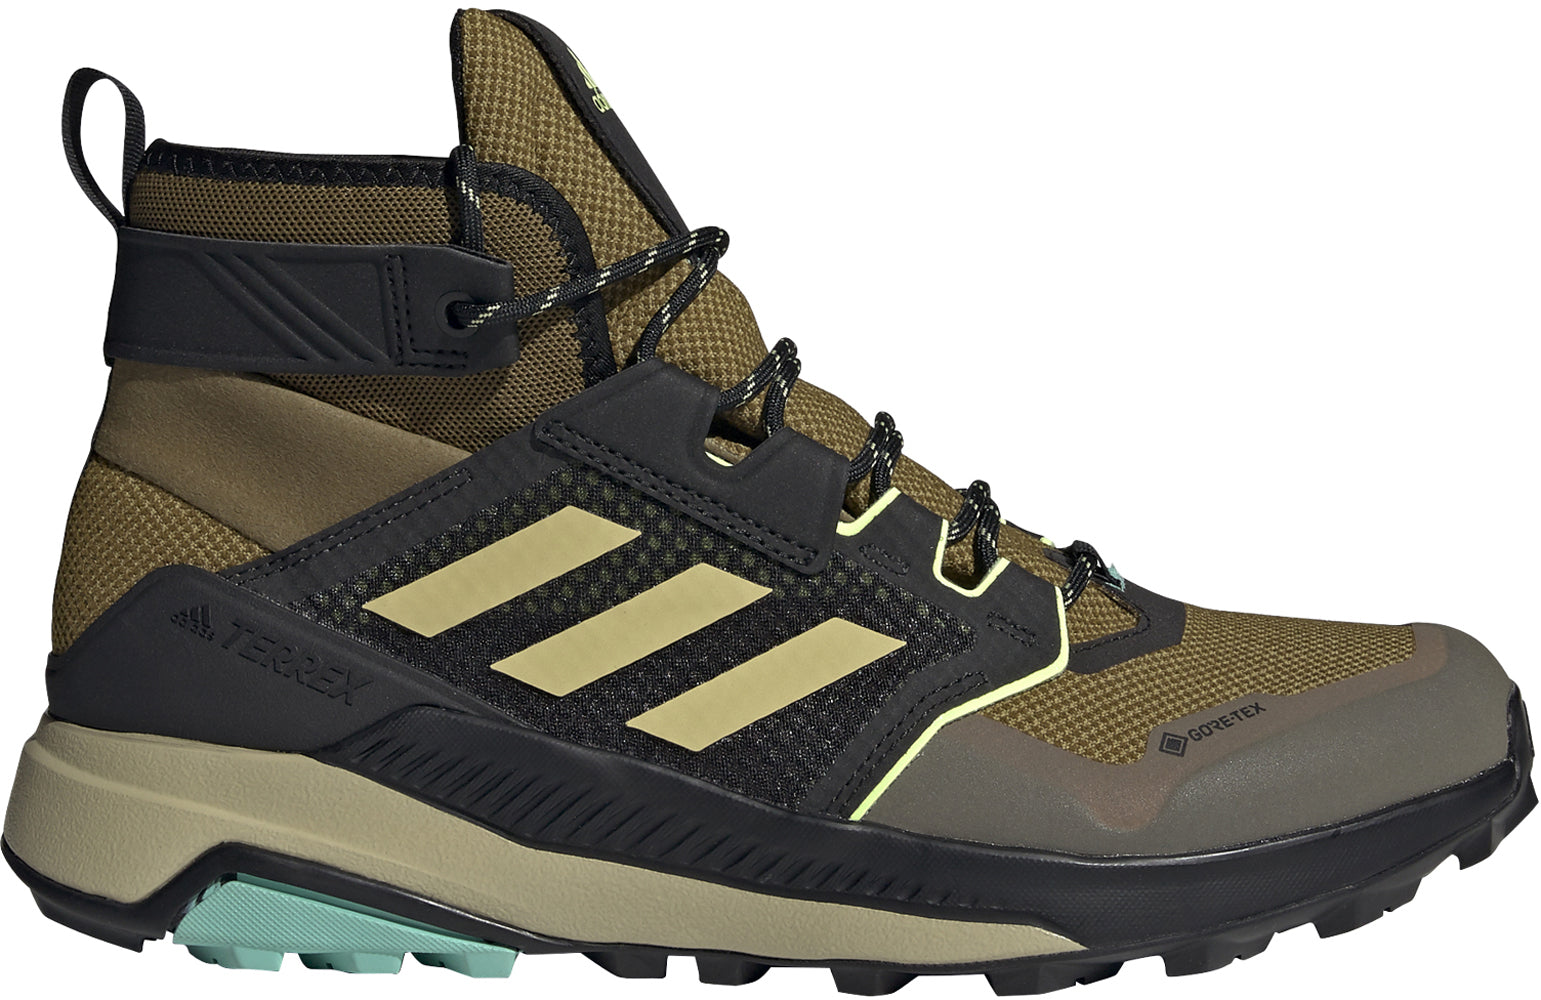 Men's adidas Terrex Trailmaker Mid Gore-TEX Hiking Shoe in Wild Moss/Halo Gold/Hi-Res Yellow from the side